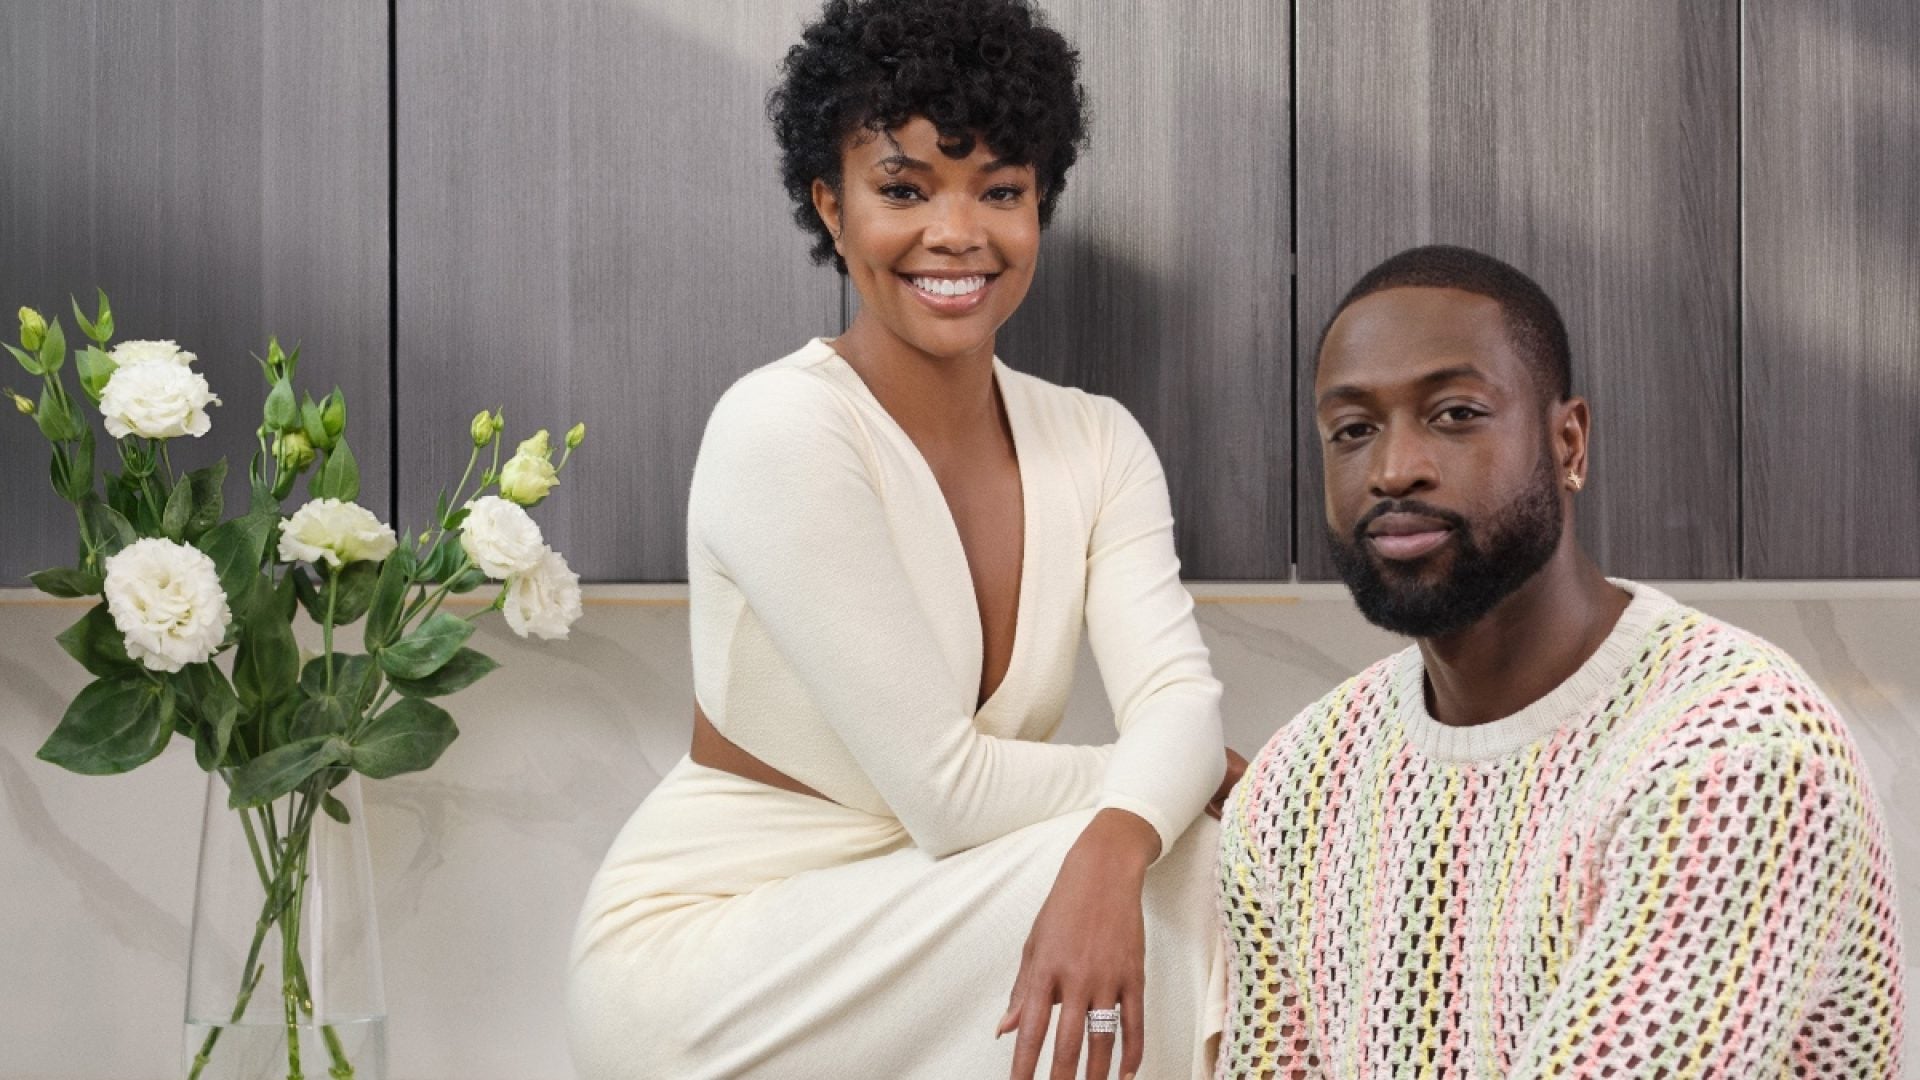 Gabrielle Union And Dwyane Wade To Receive President’s Award At NAACP Image Awards